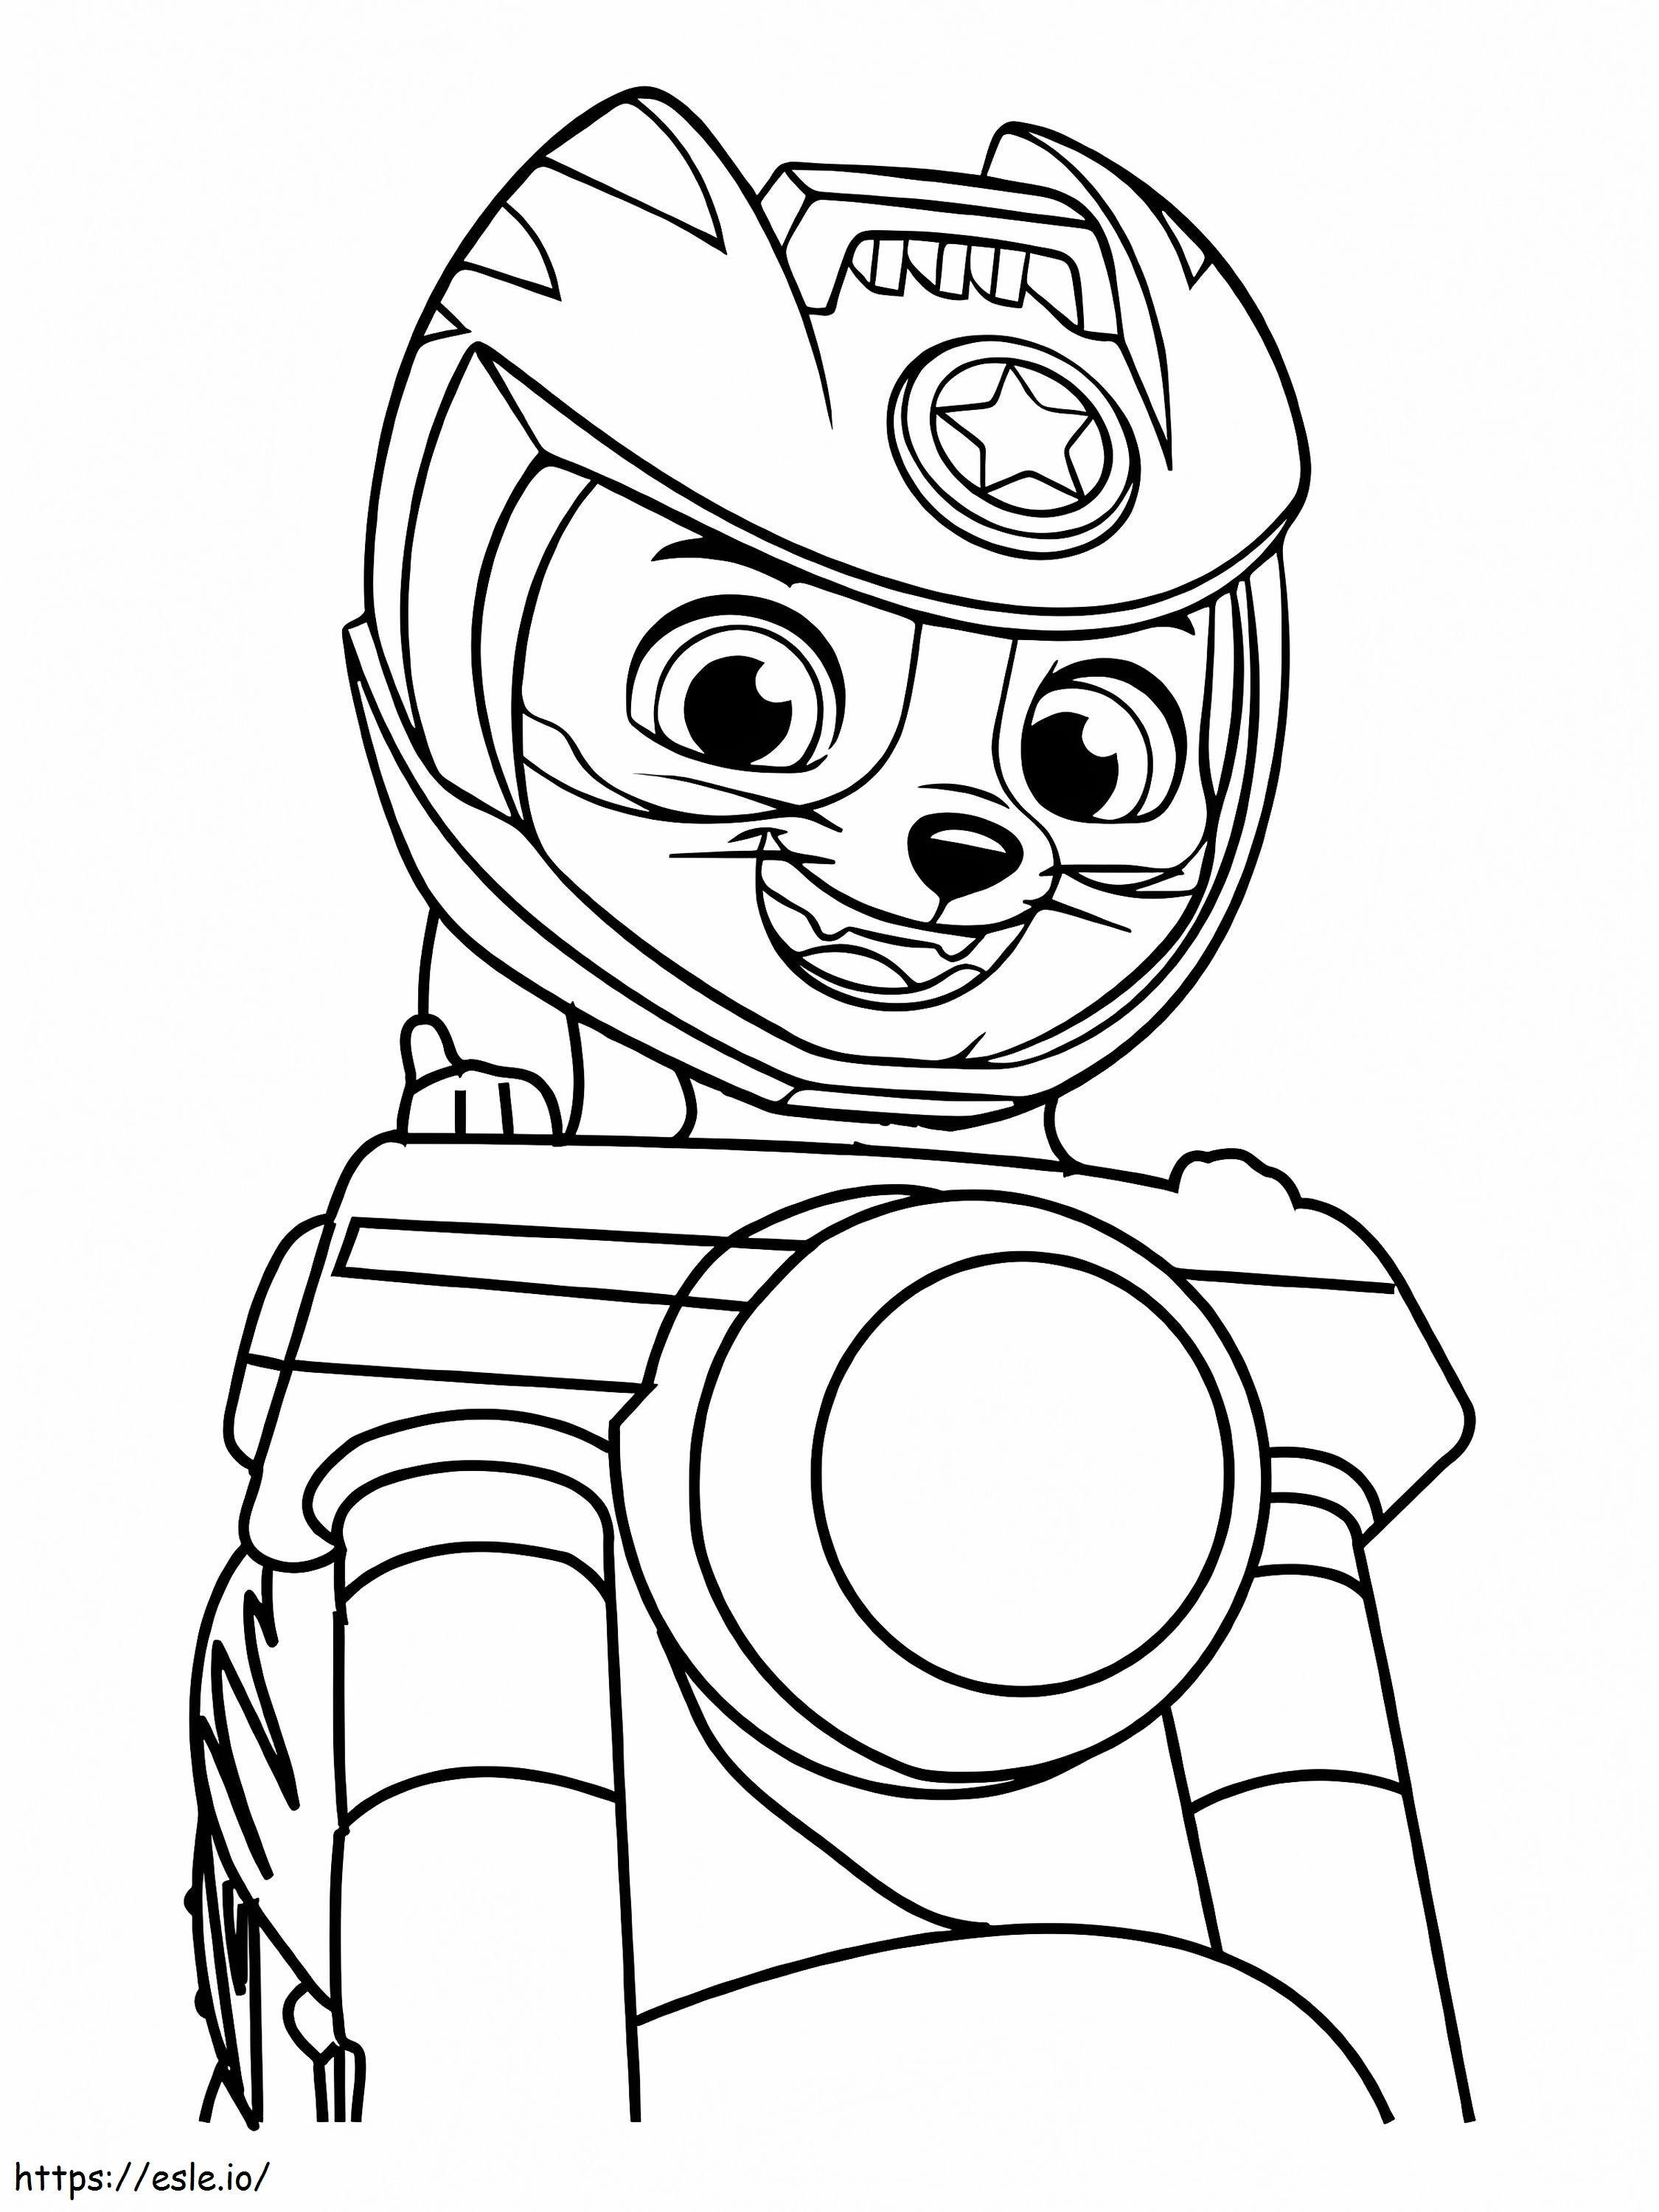 Driving Wild Cat coloring page